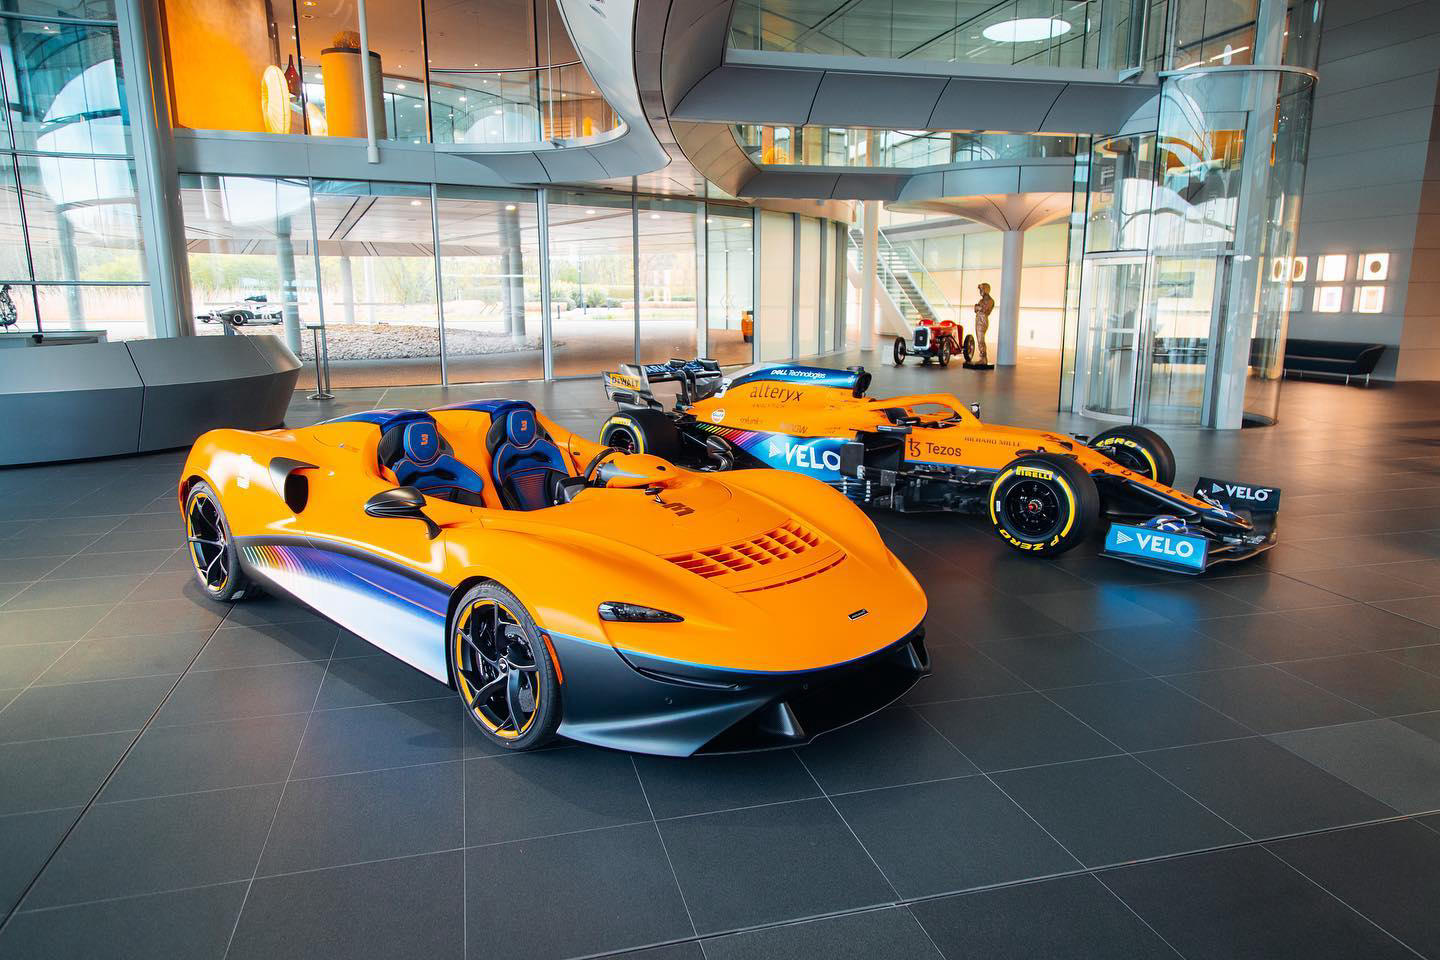 McLaren Automotive - Taking F1 engineering to the road